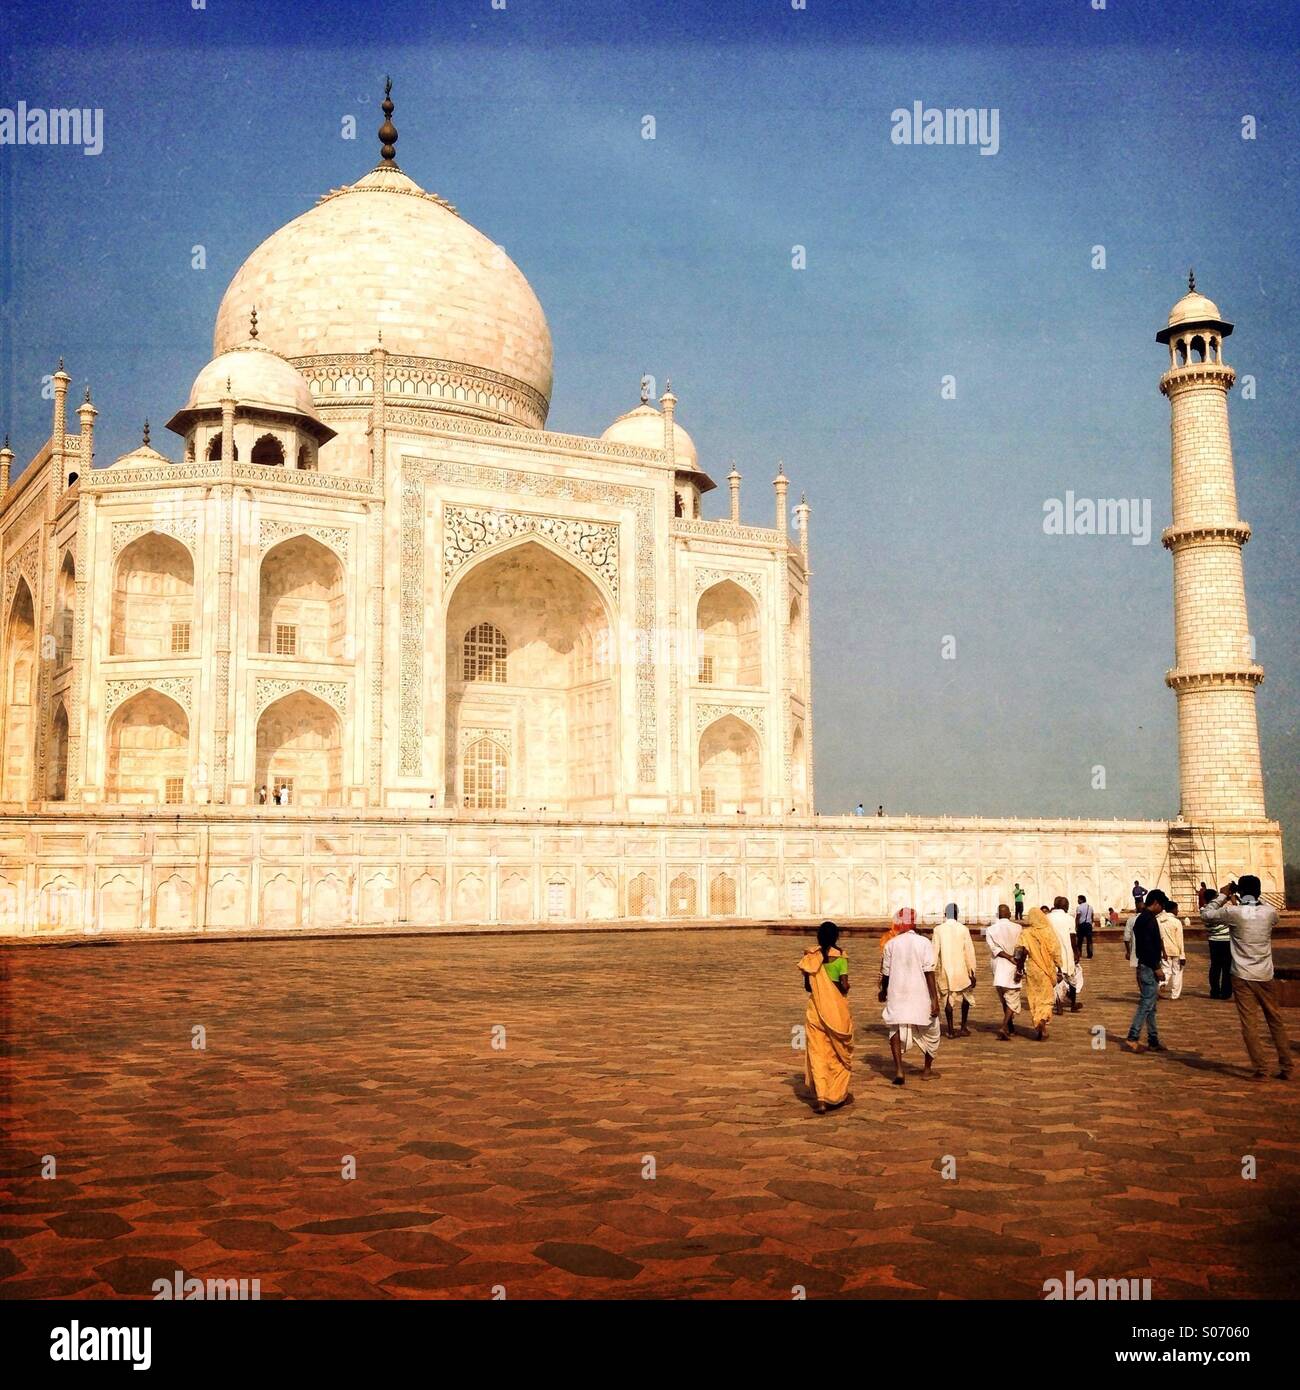 People wearing traditional clothes enter the Taj Mahal, Agra, India Stock Photo